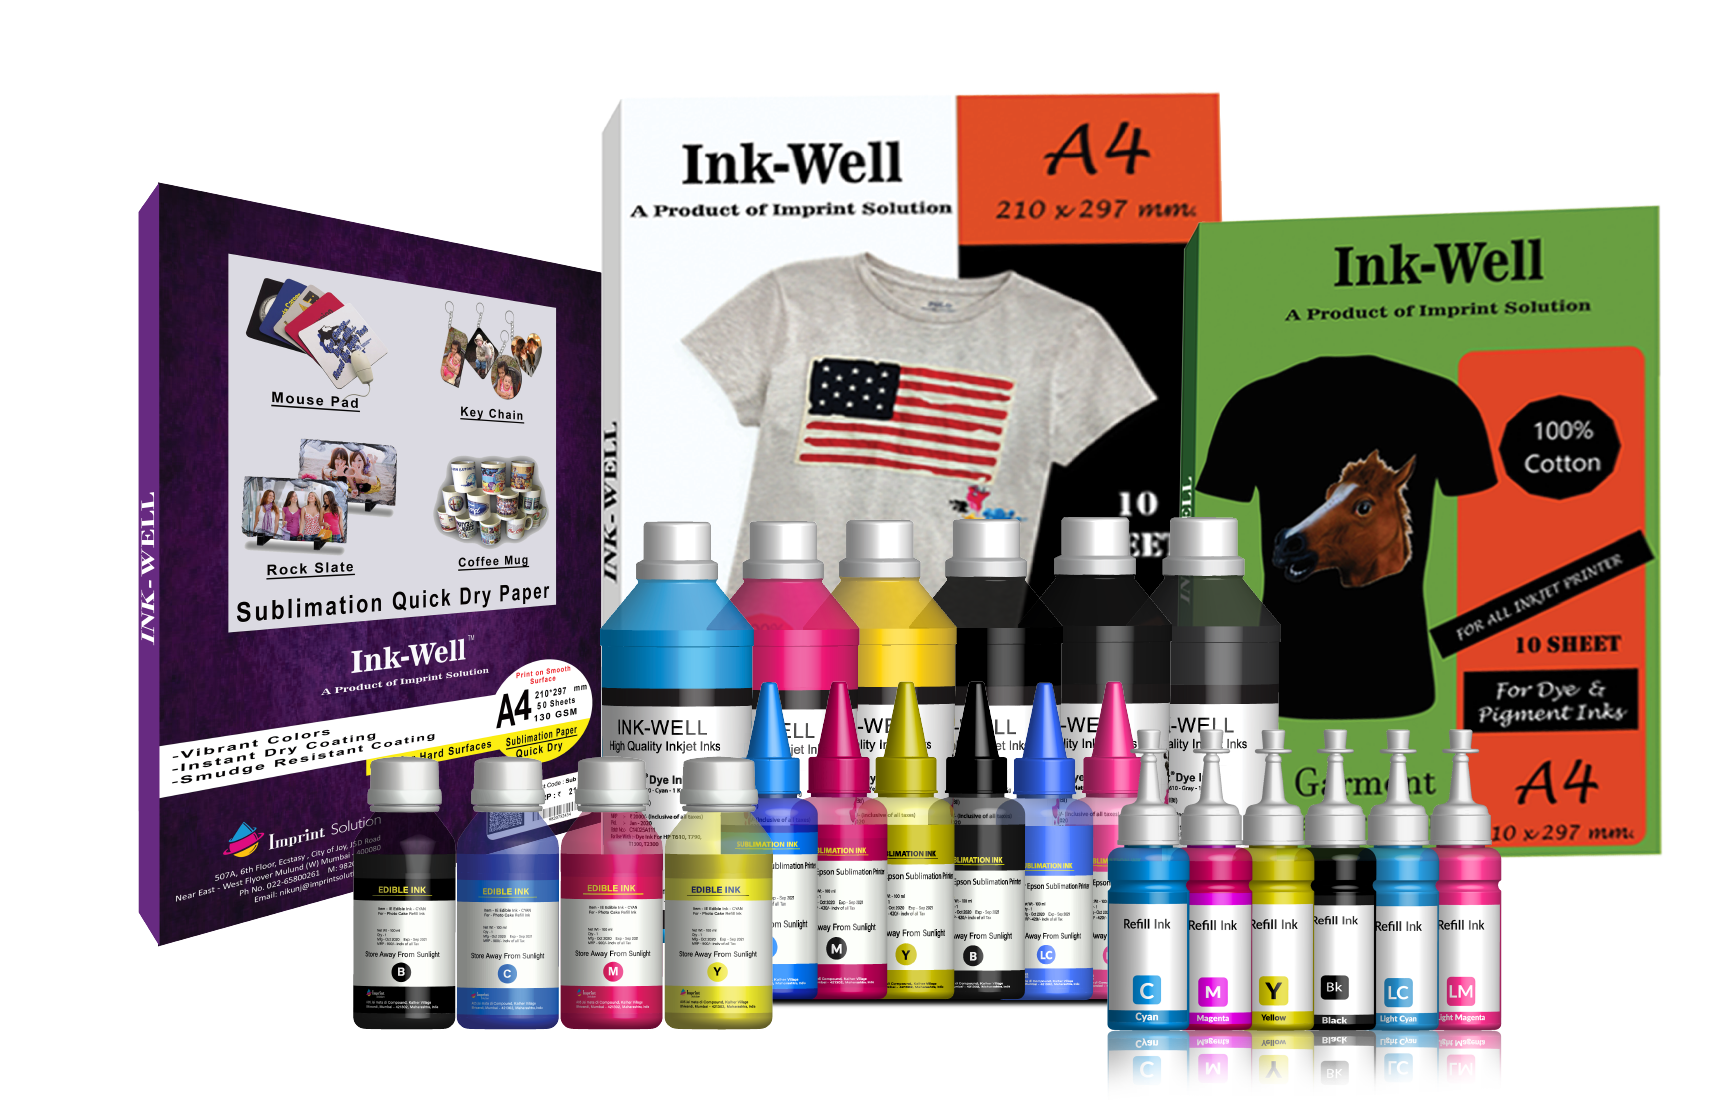 1 BANER 02 IMPRINT SOLUTION We Imprint Solution Dealing With Printers, Inks, Papers https://imprintsolution.co.in/wp-content/uploads/2021/02/cropped-Imprint-logo-01-1.png